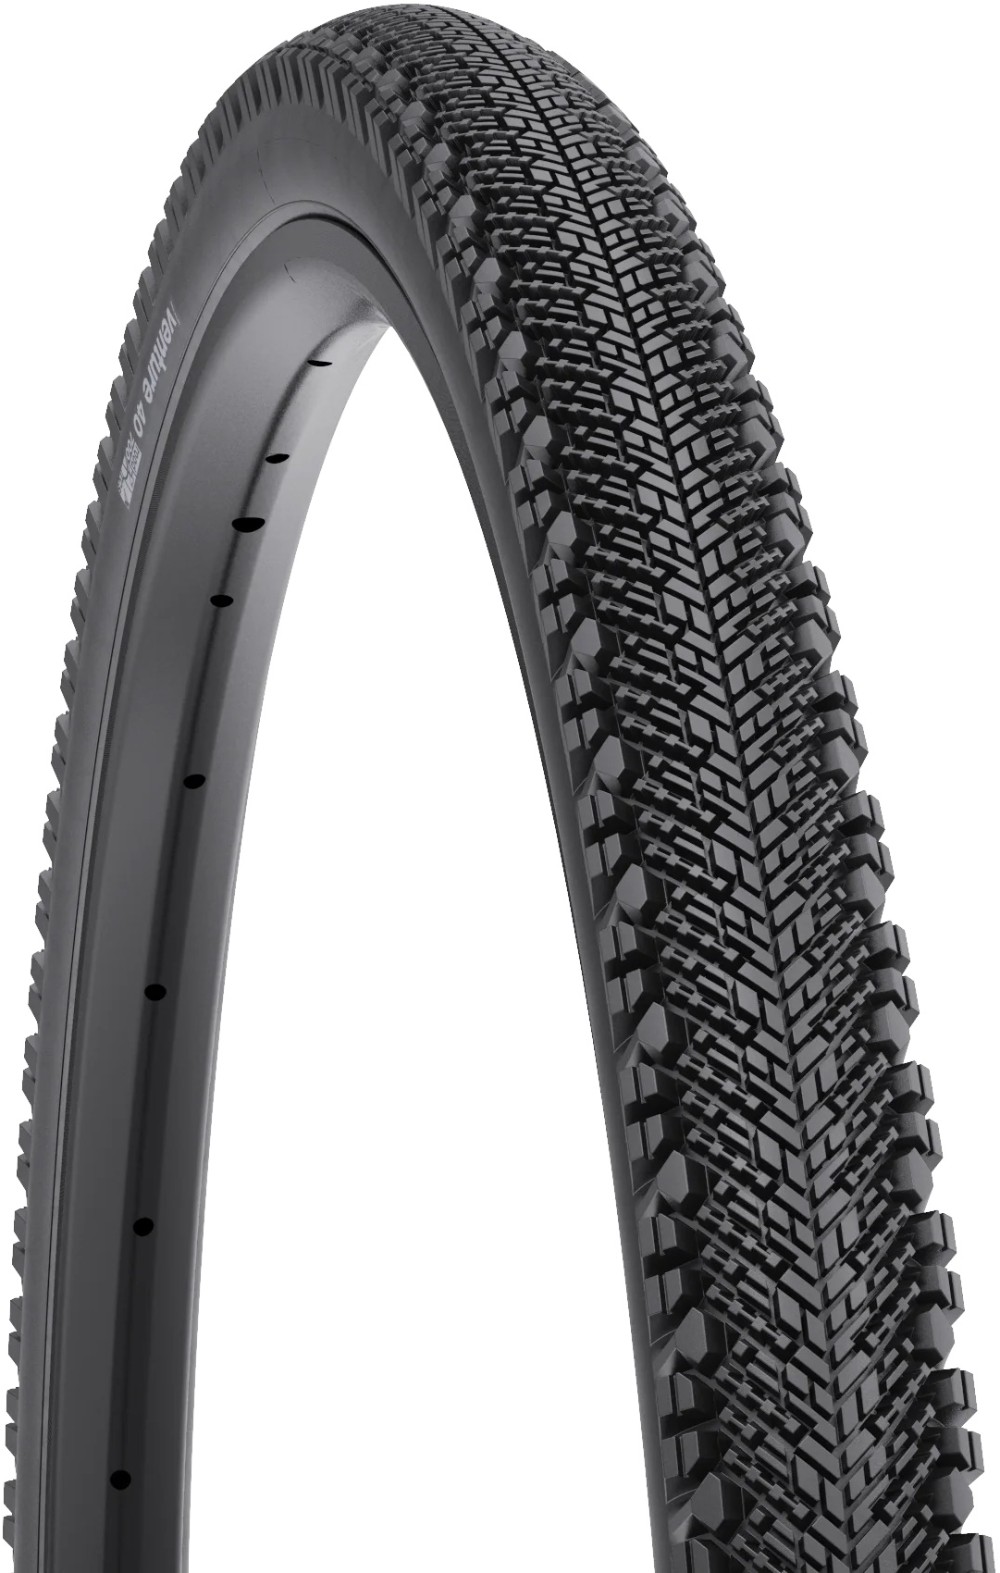 Venture TCS Light/Fast Rolling 120tpi Dual DNA SG2 700c Tyre image 0